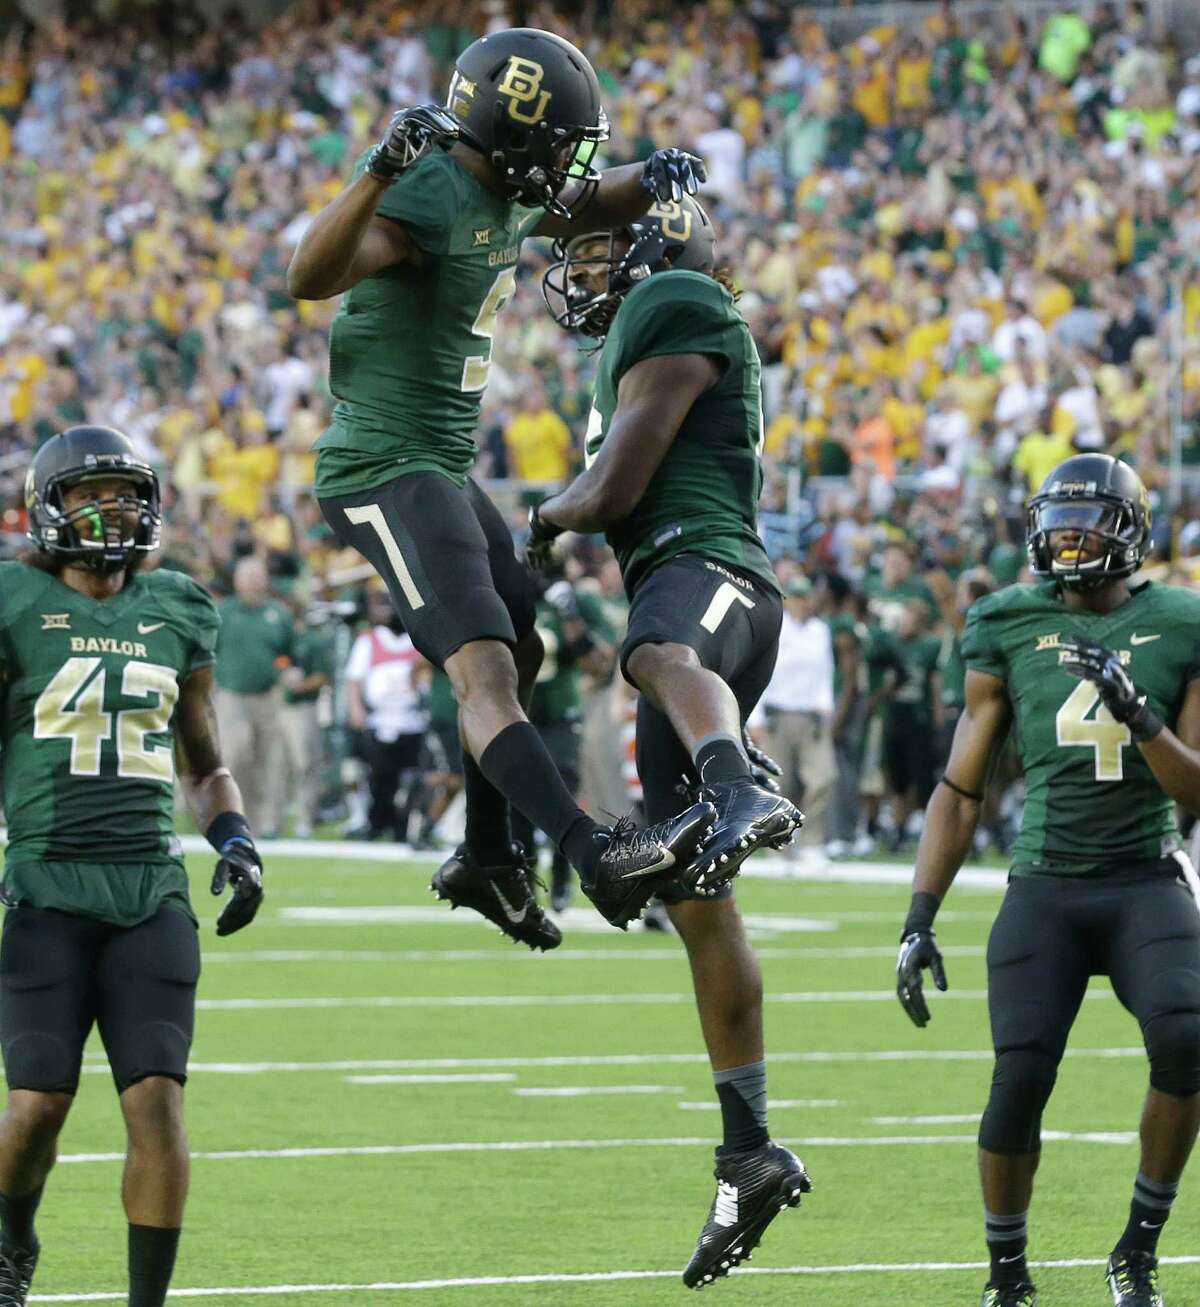 Baylor wide receiver KD Cannon (9) celebrates his touchdown catch with teammate Davion Hall (16) as Levi Norwood (42) and Jay Lee (4) look on during the first half of an NCAA college football game against SMU Sunday, Aug. 31, 2014, in Waco, Texas. (AP Photo/LM Otero)